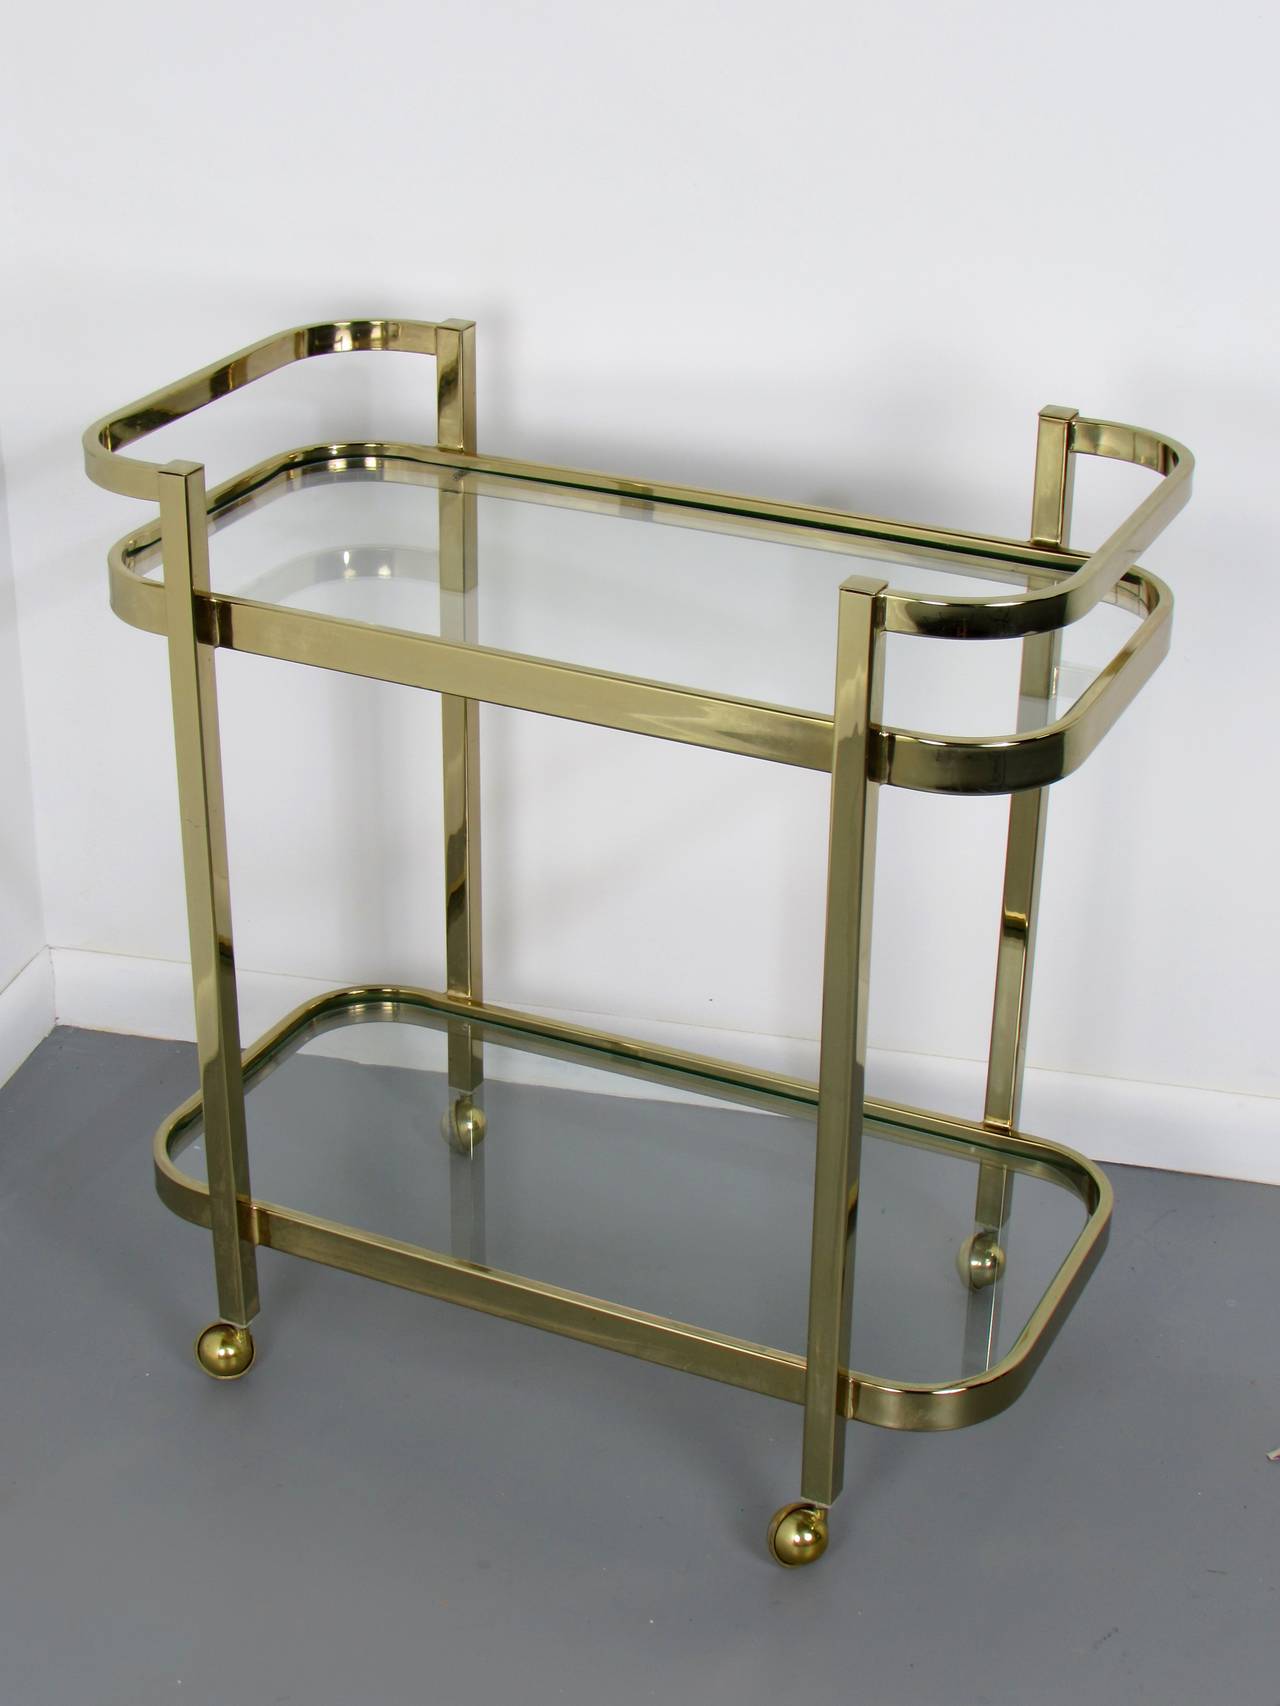 Luscious brass bar cart by Milo Baughman for Thayer Coggin, 1970s. This piece is in excellent condition with minor wear. 

We offer free regular deliveries to NYC and Philadelphia area. Delivery to DC, MD, CT and MA are available if schedule